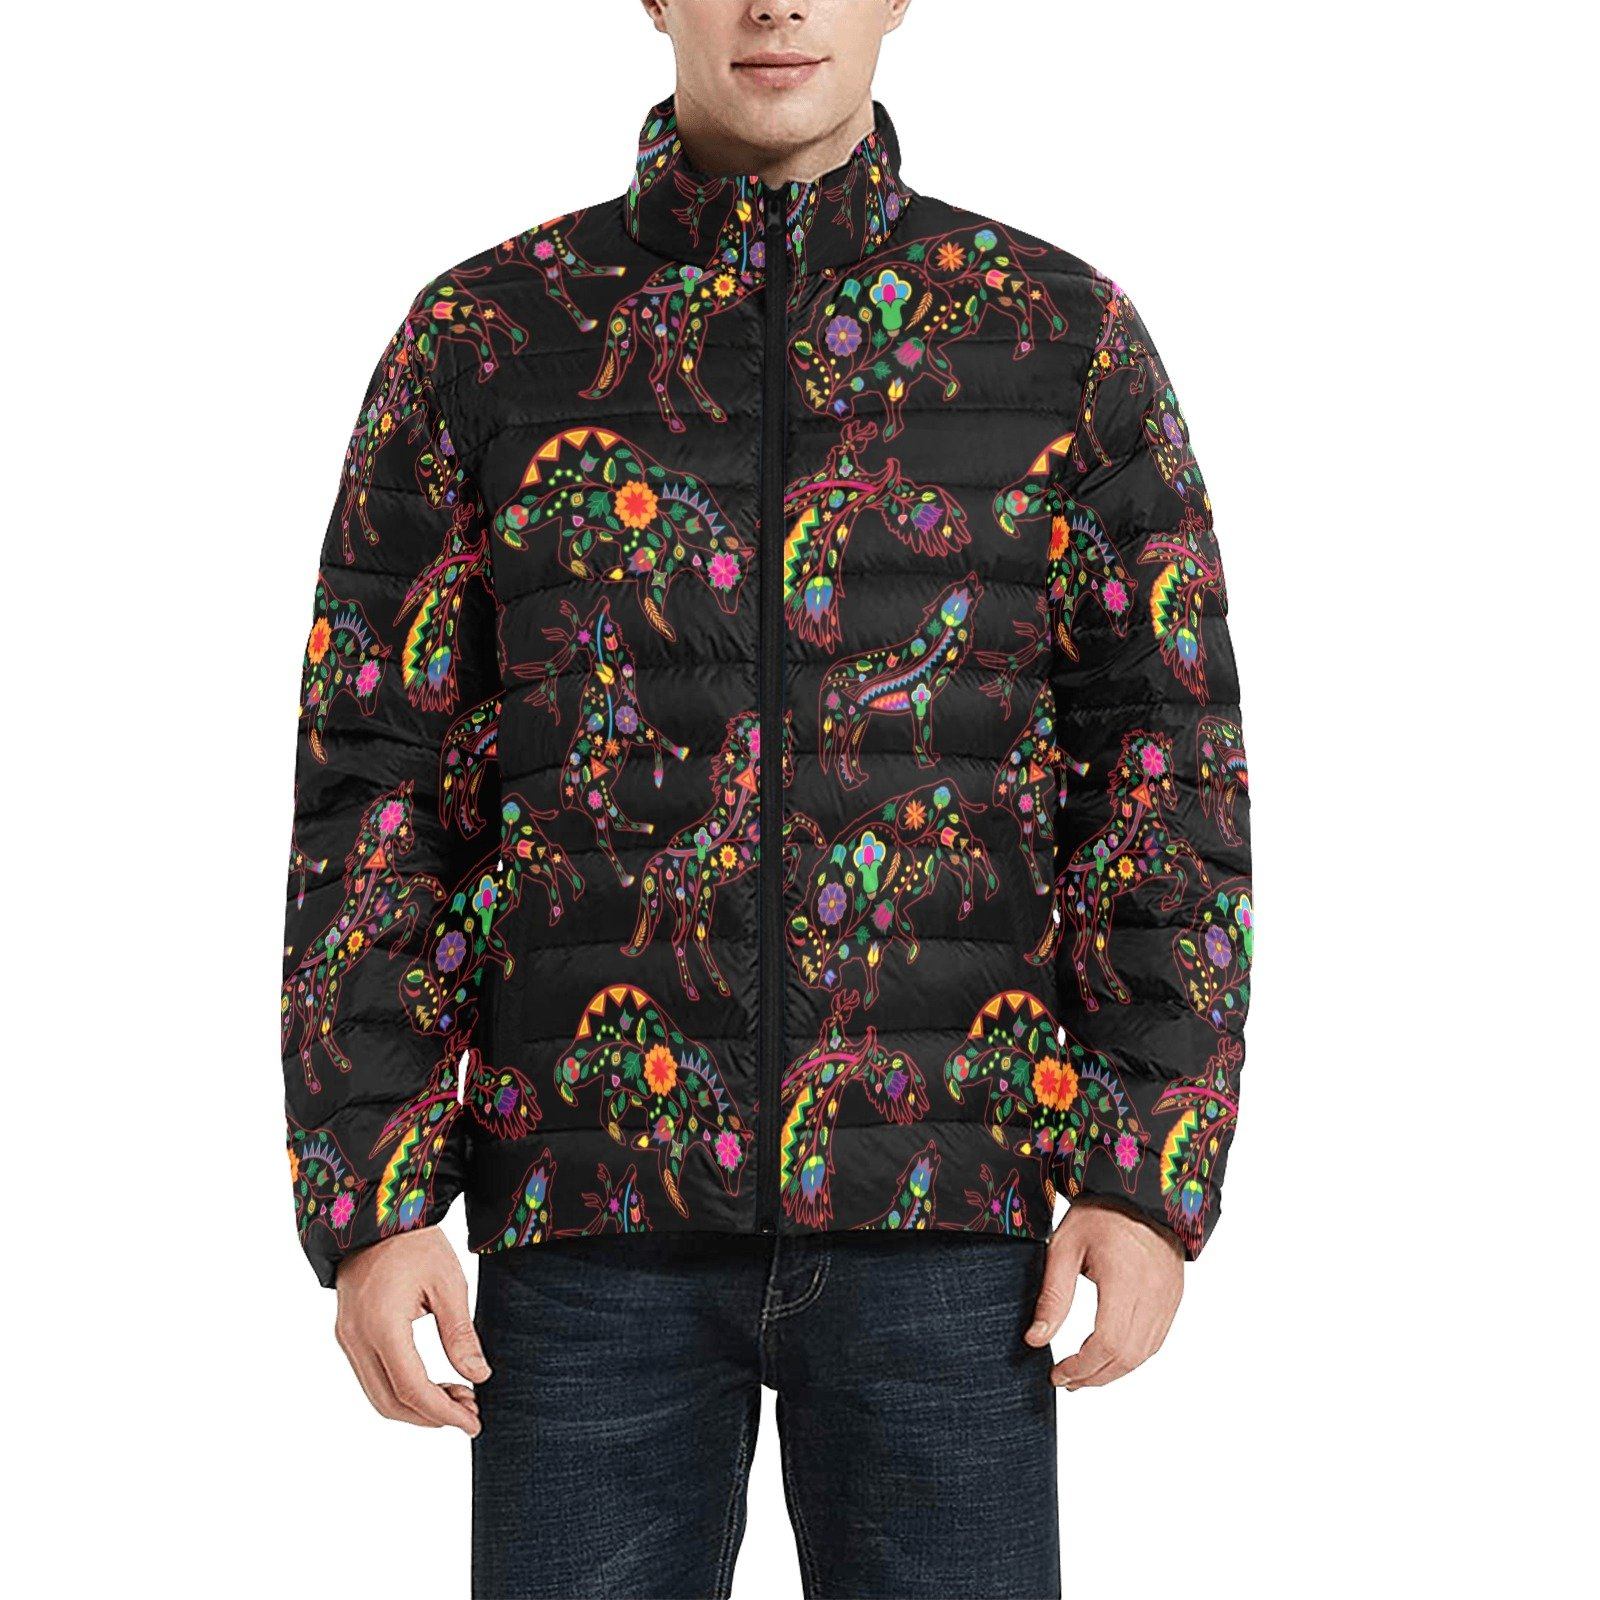 Floral Animals Men's Stand Collar Padded Jacket (Model H41) Men's Stand Collar Padded Jacket (H41) e-joyer 